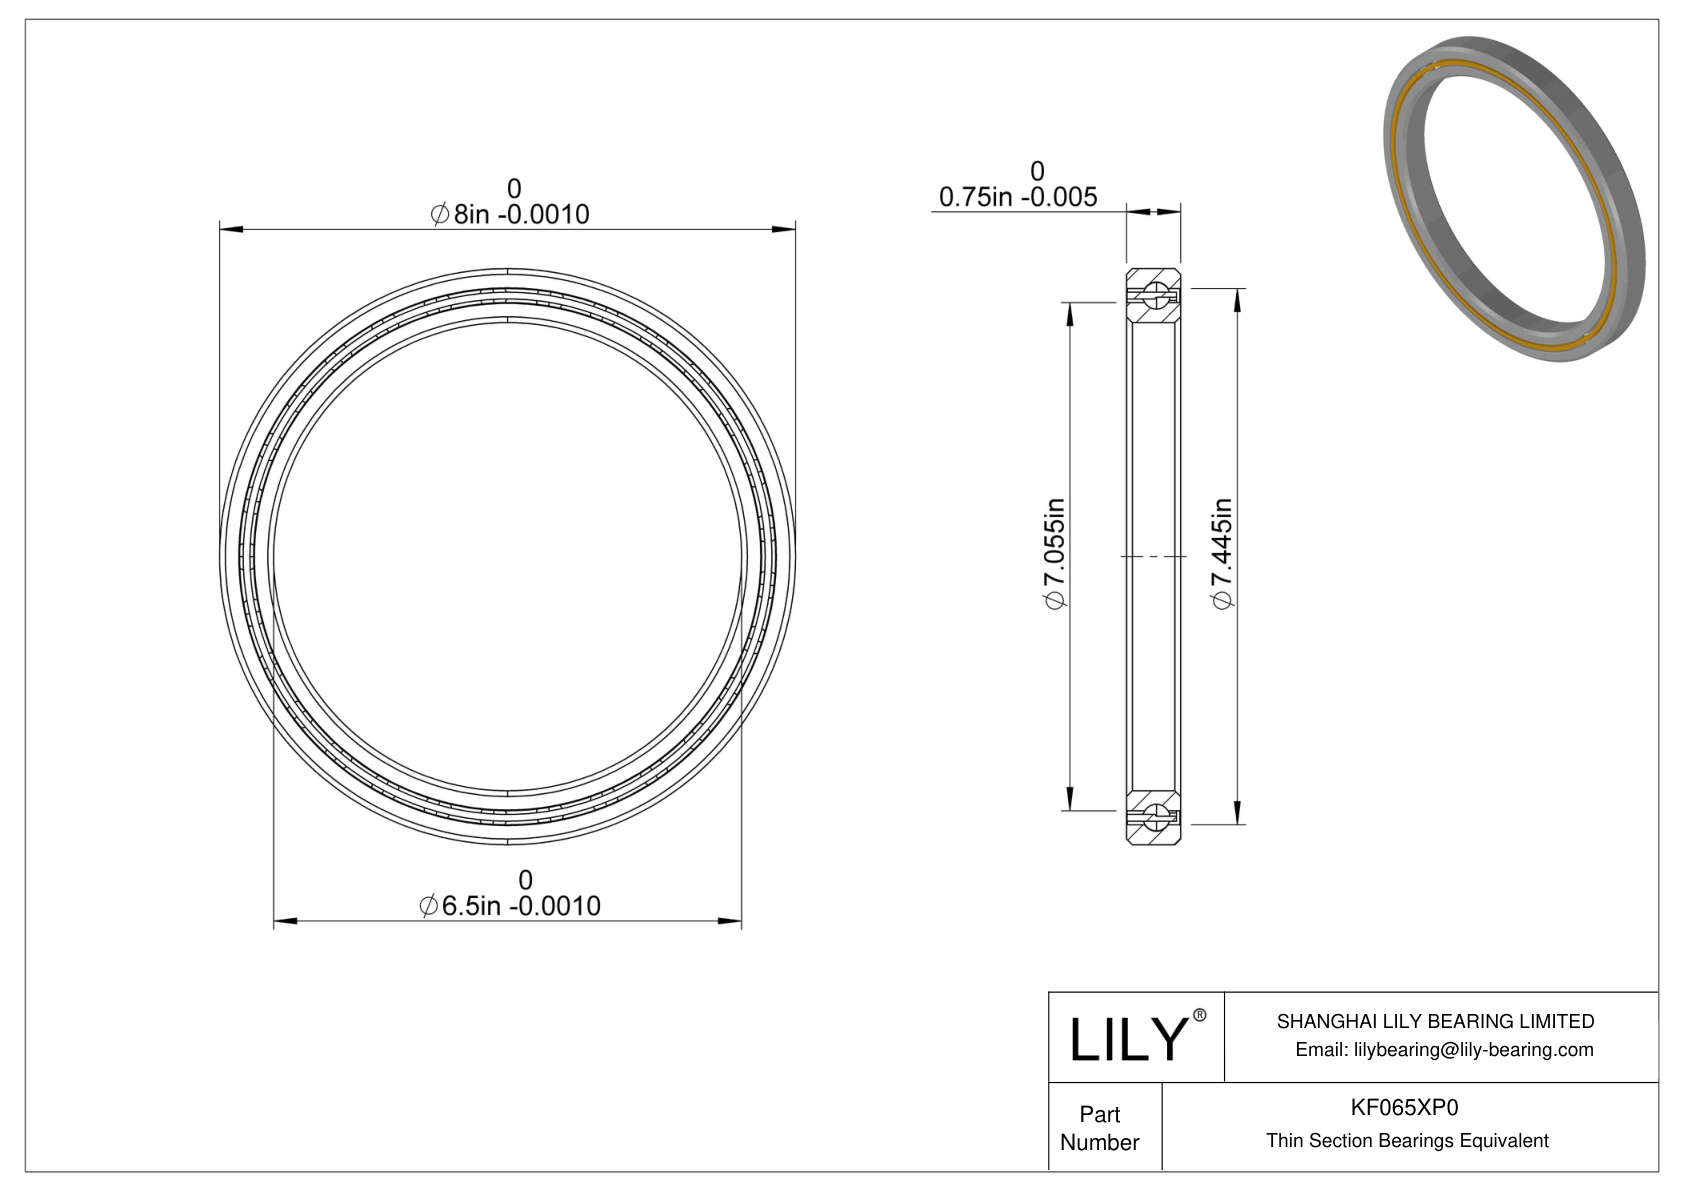 KF065XP0 Constant Section (CS) Bearings cad drawing